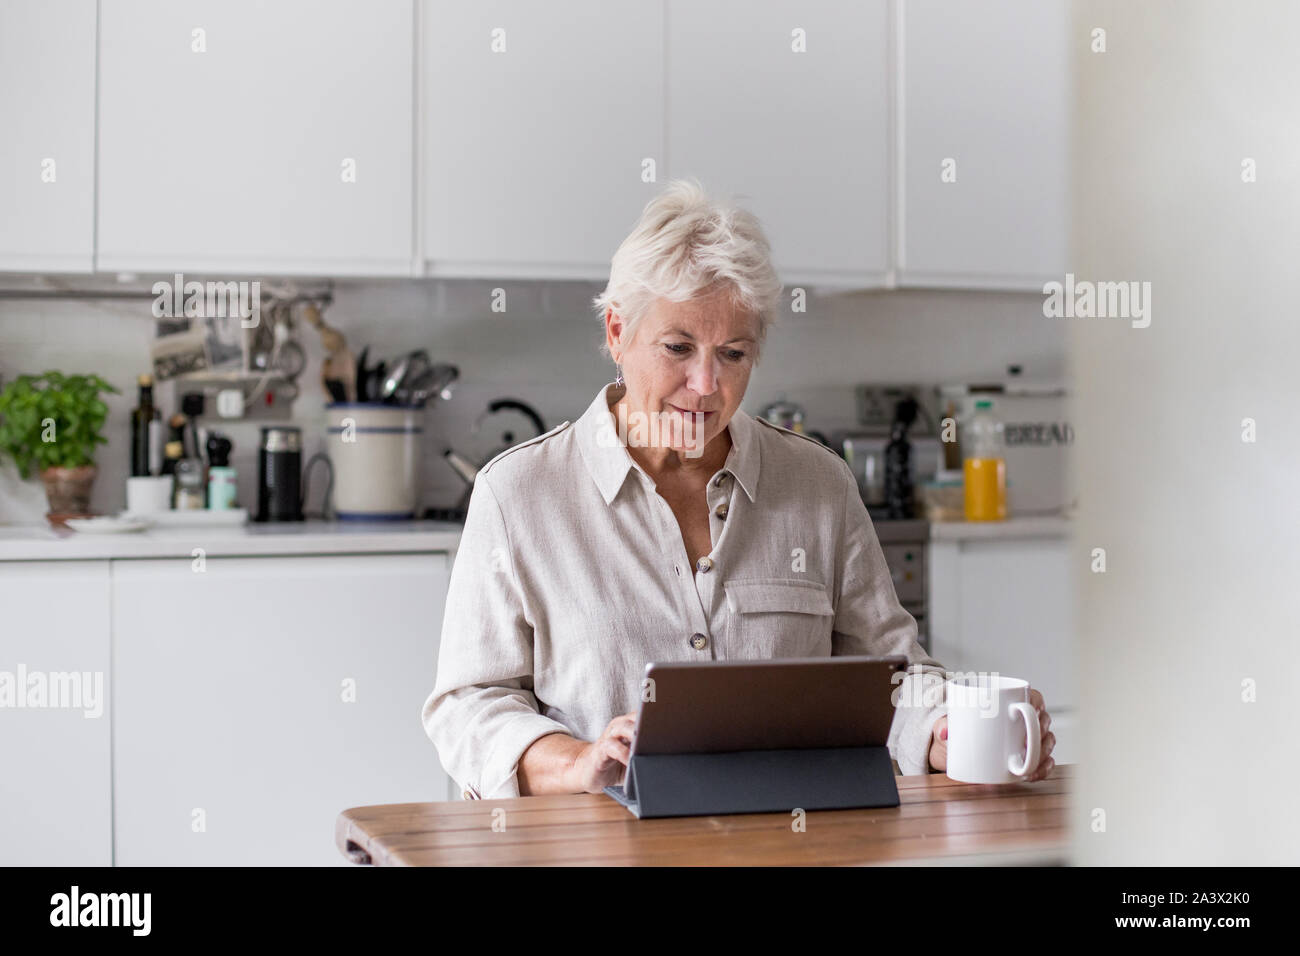 Mature adult woman in kitchen using a digital tablet with keypad Stock Photo